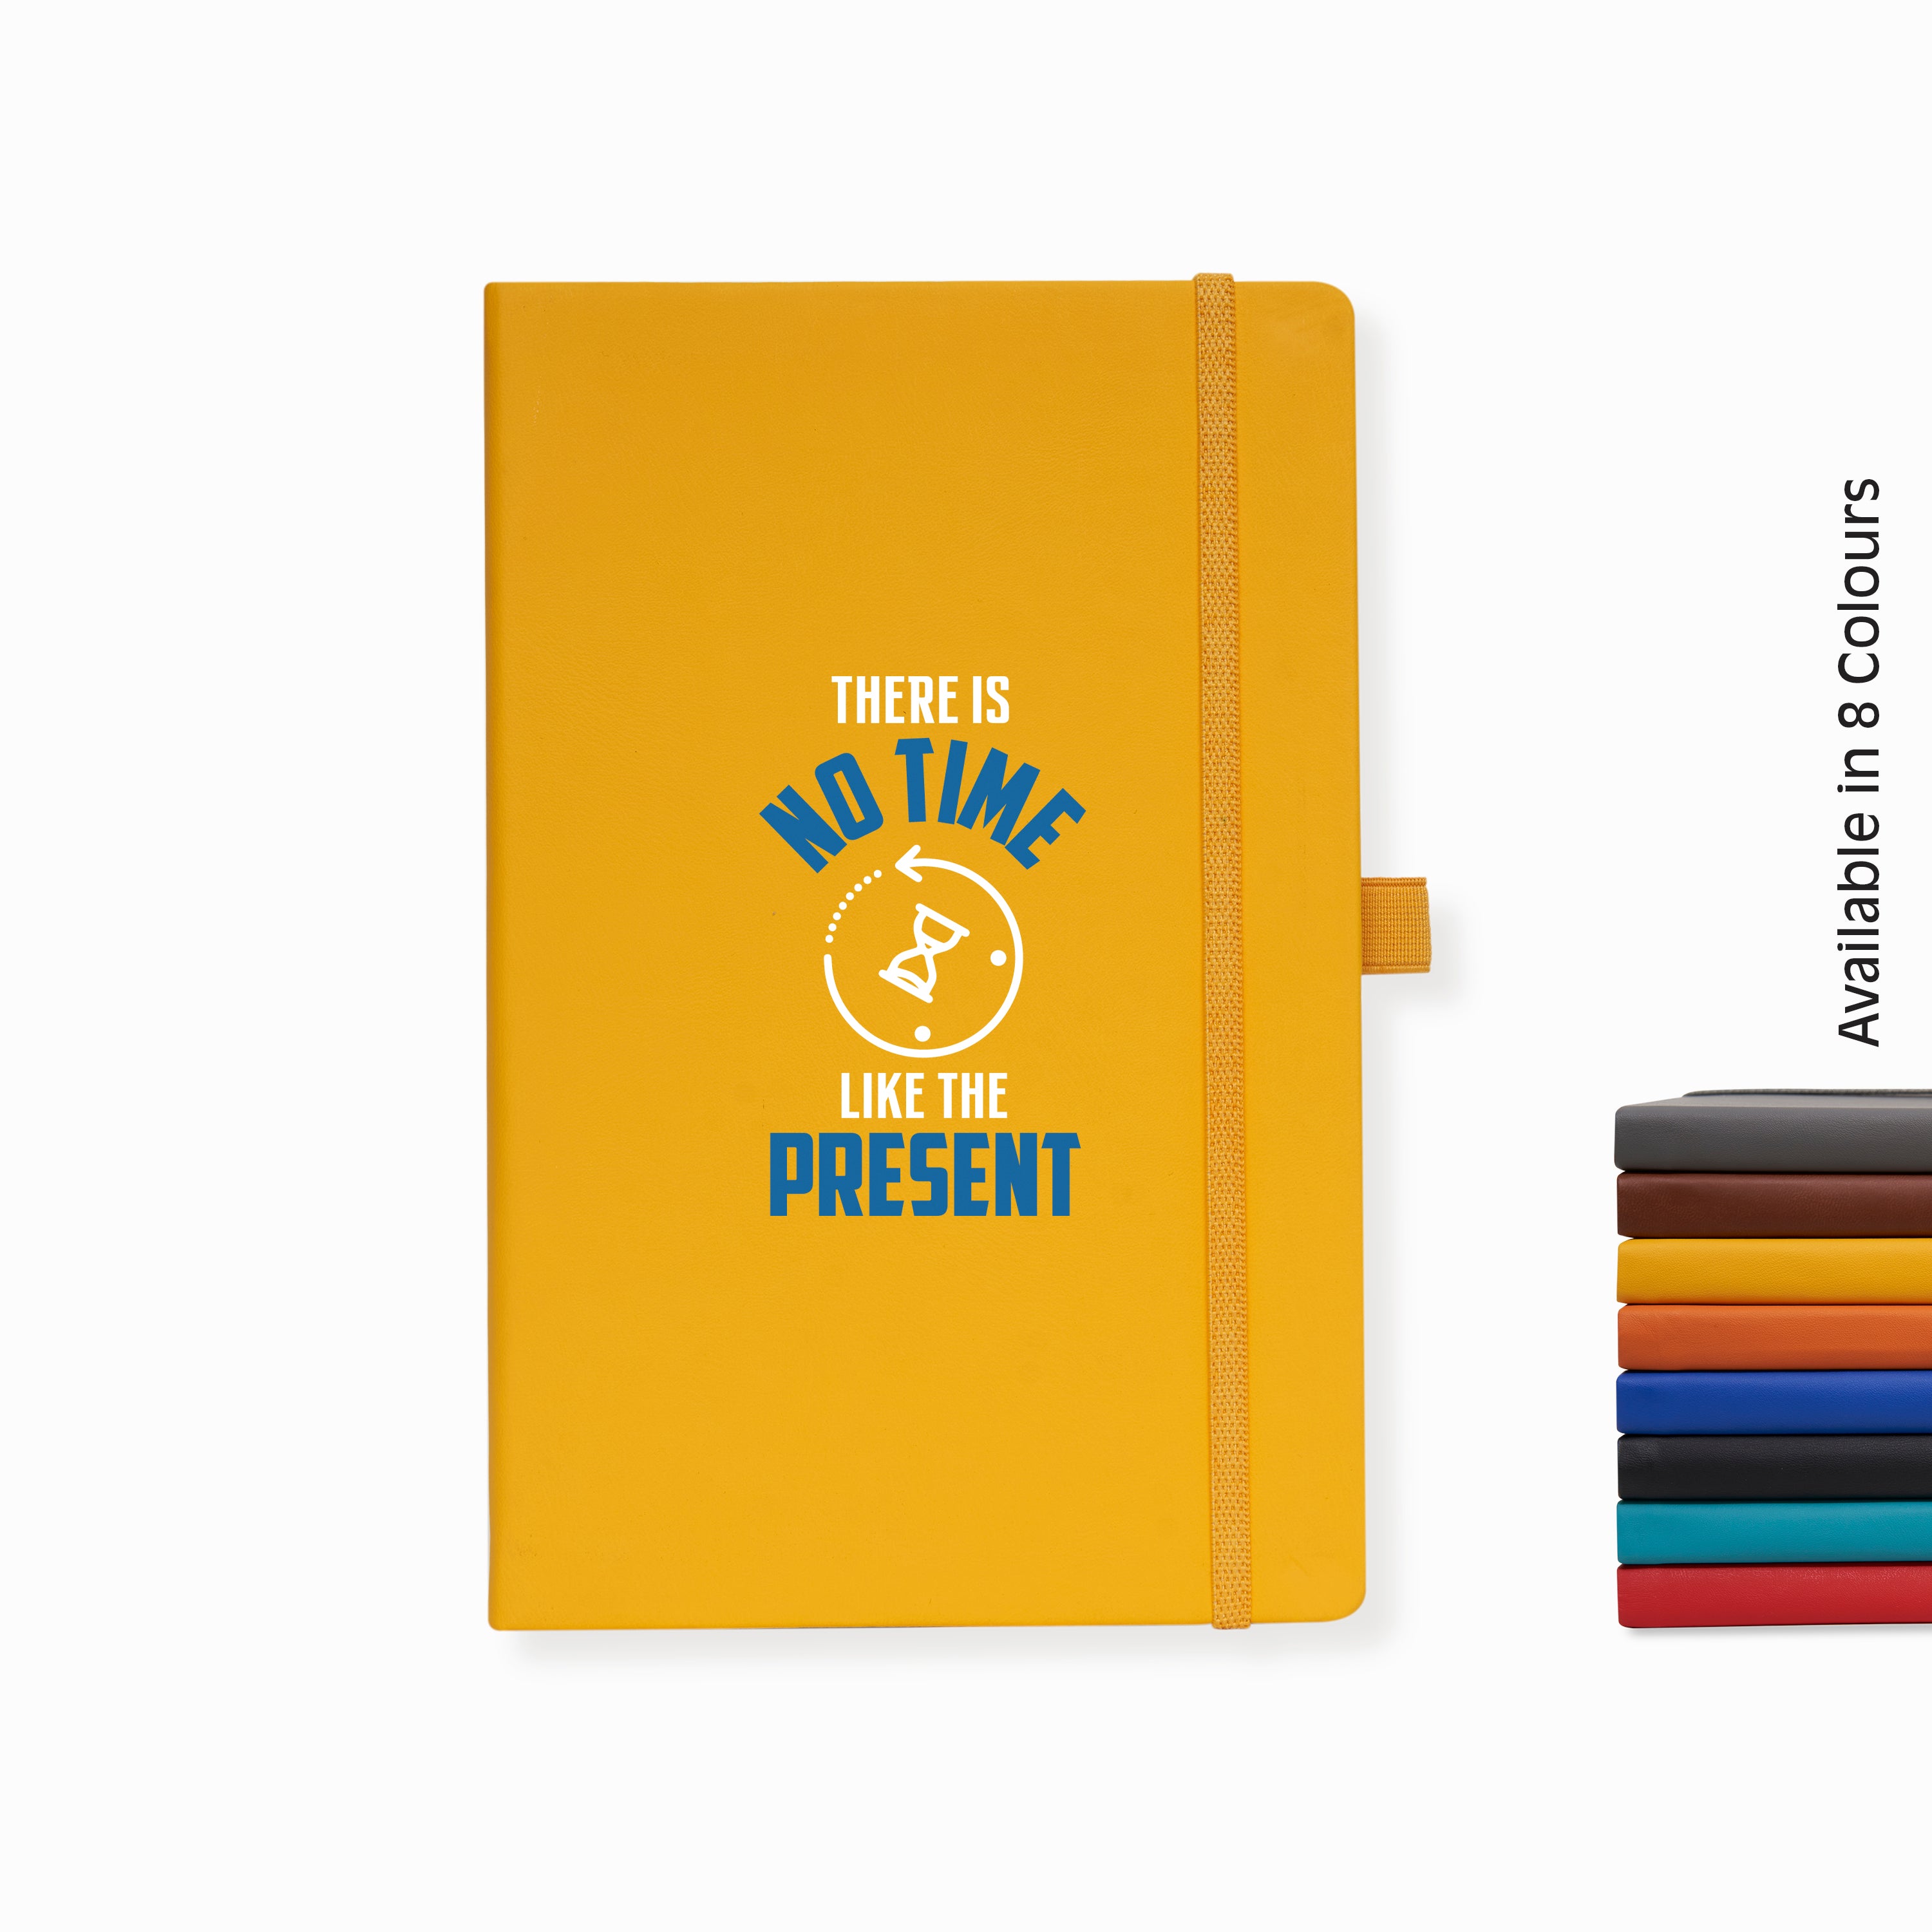 Doodle Pro Series Executive A5 PU Leather Hardbound Ruled Yellow Notebook with Pen Loop [There Is No Time]